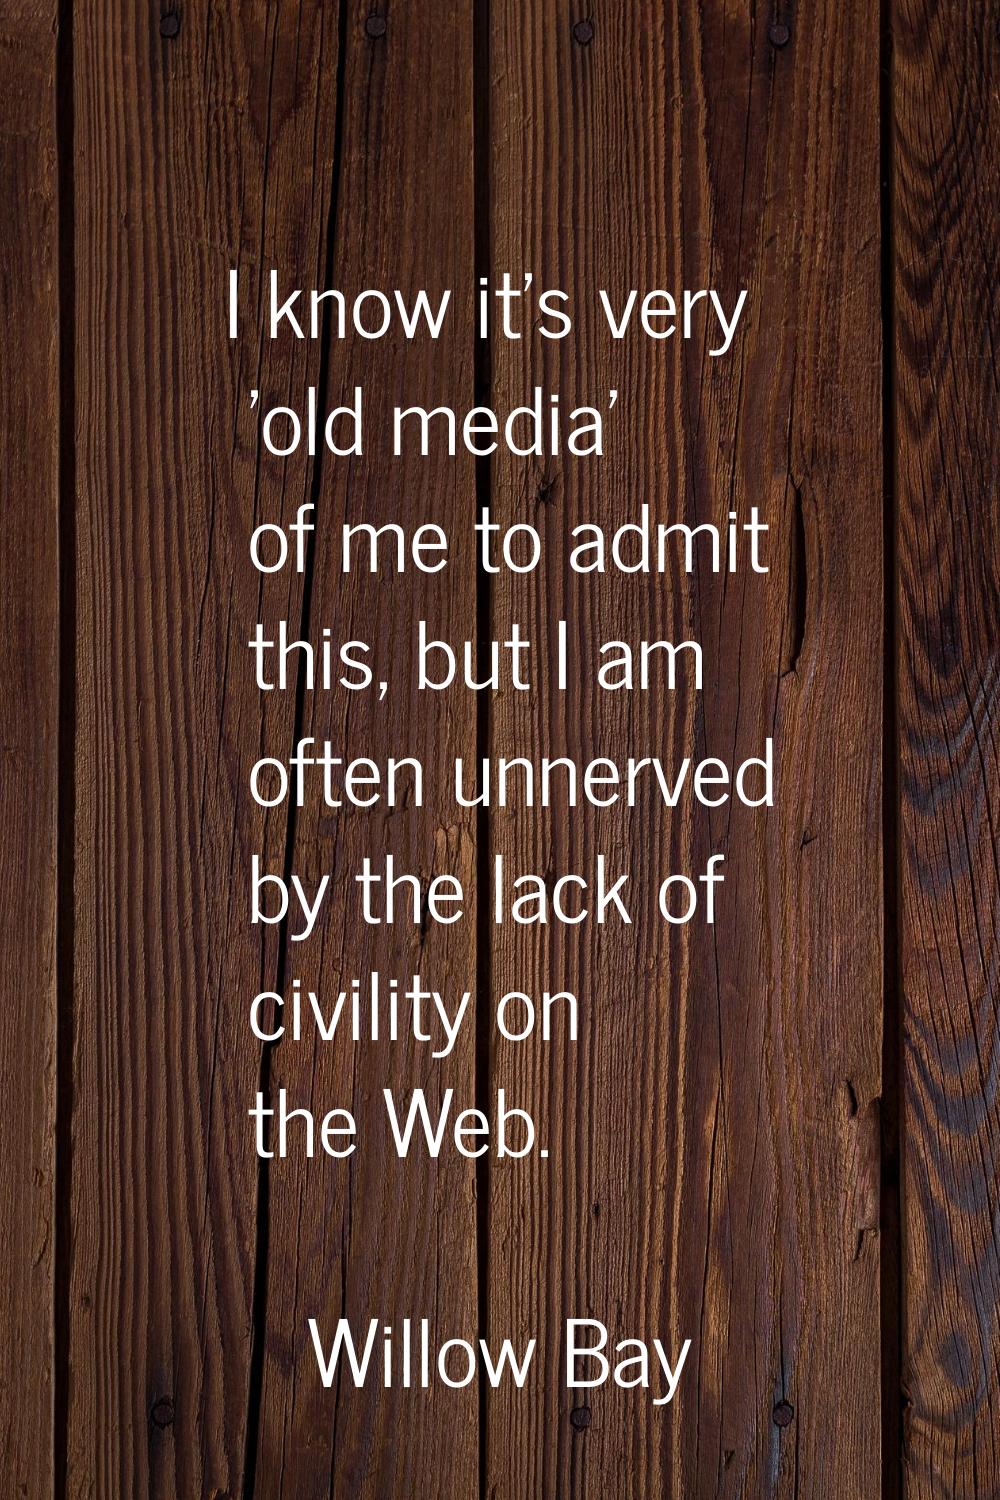 I know it's very 'old media' of me to admit this, but I am often unnerved by the lack of civility o